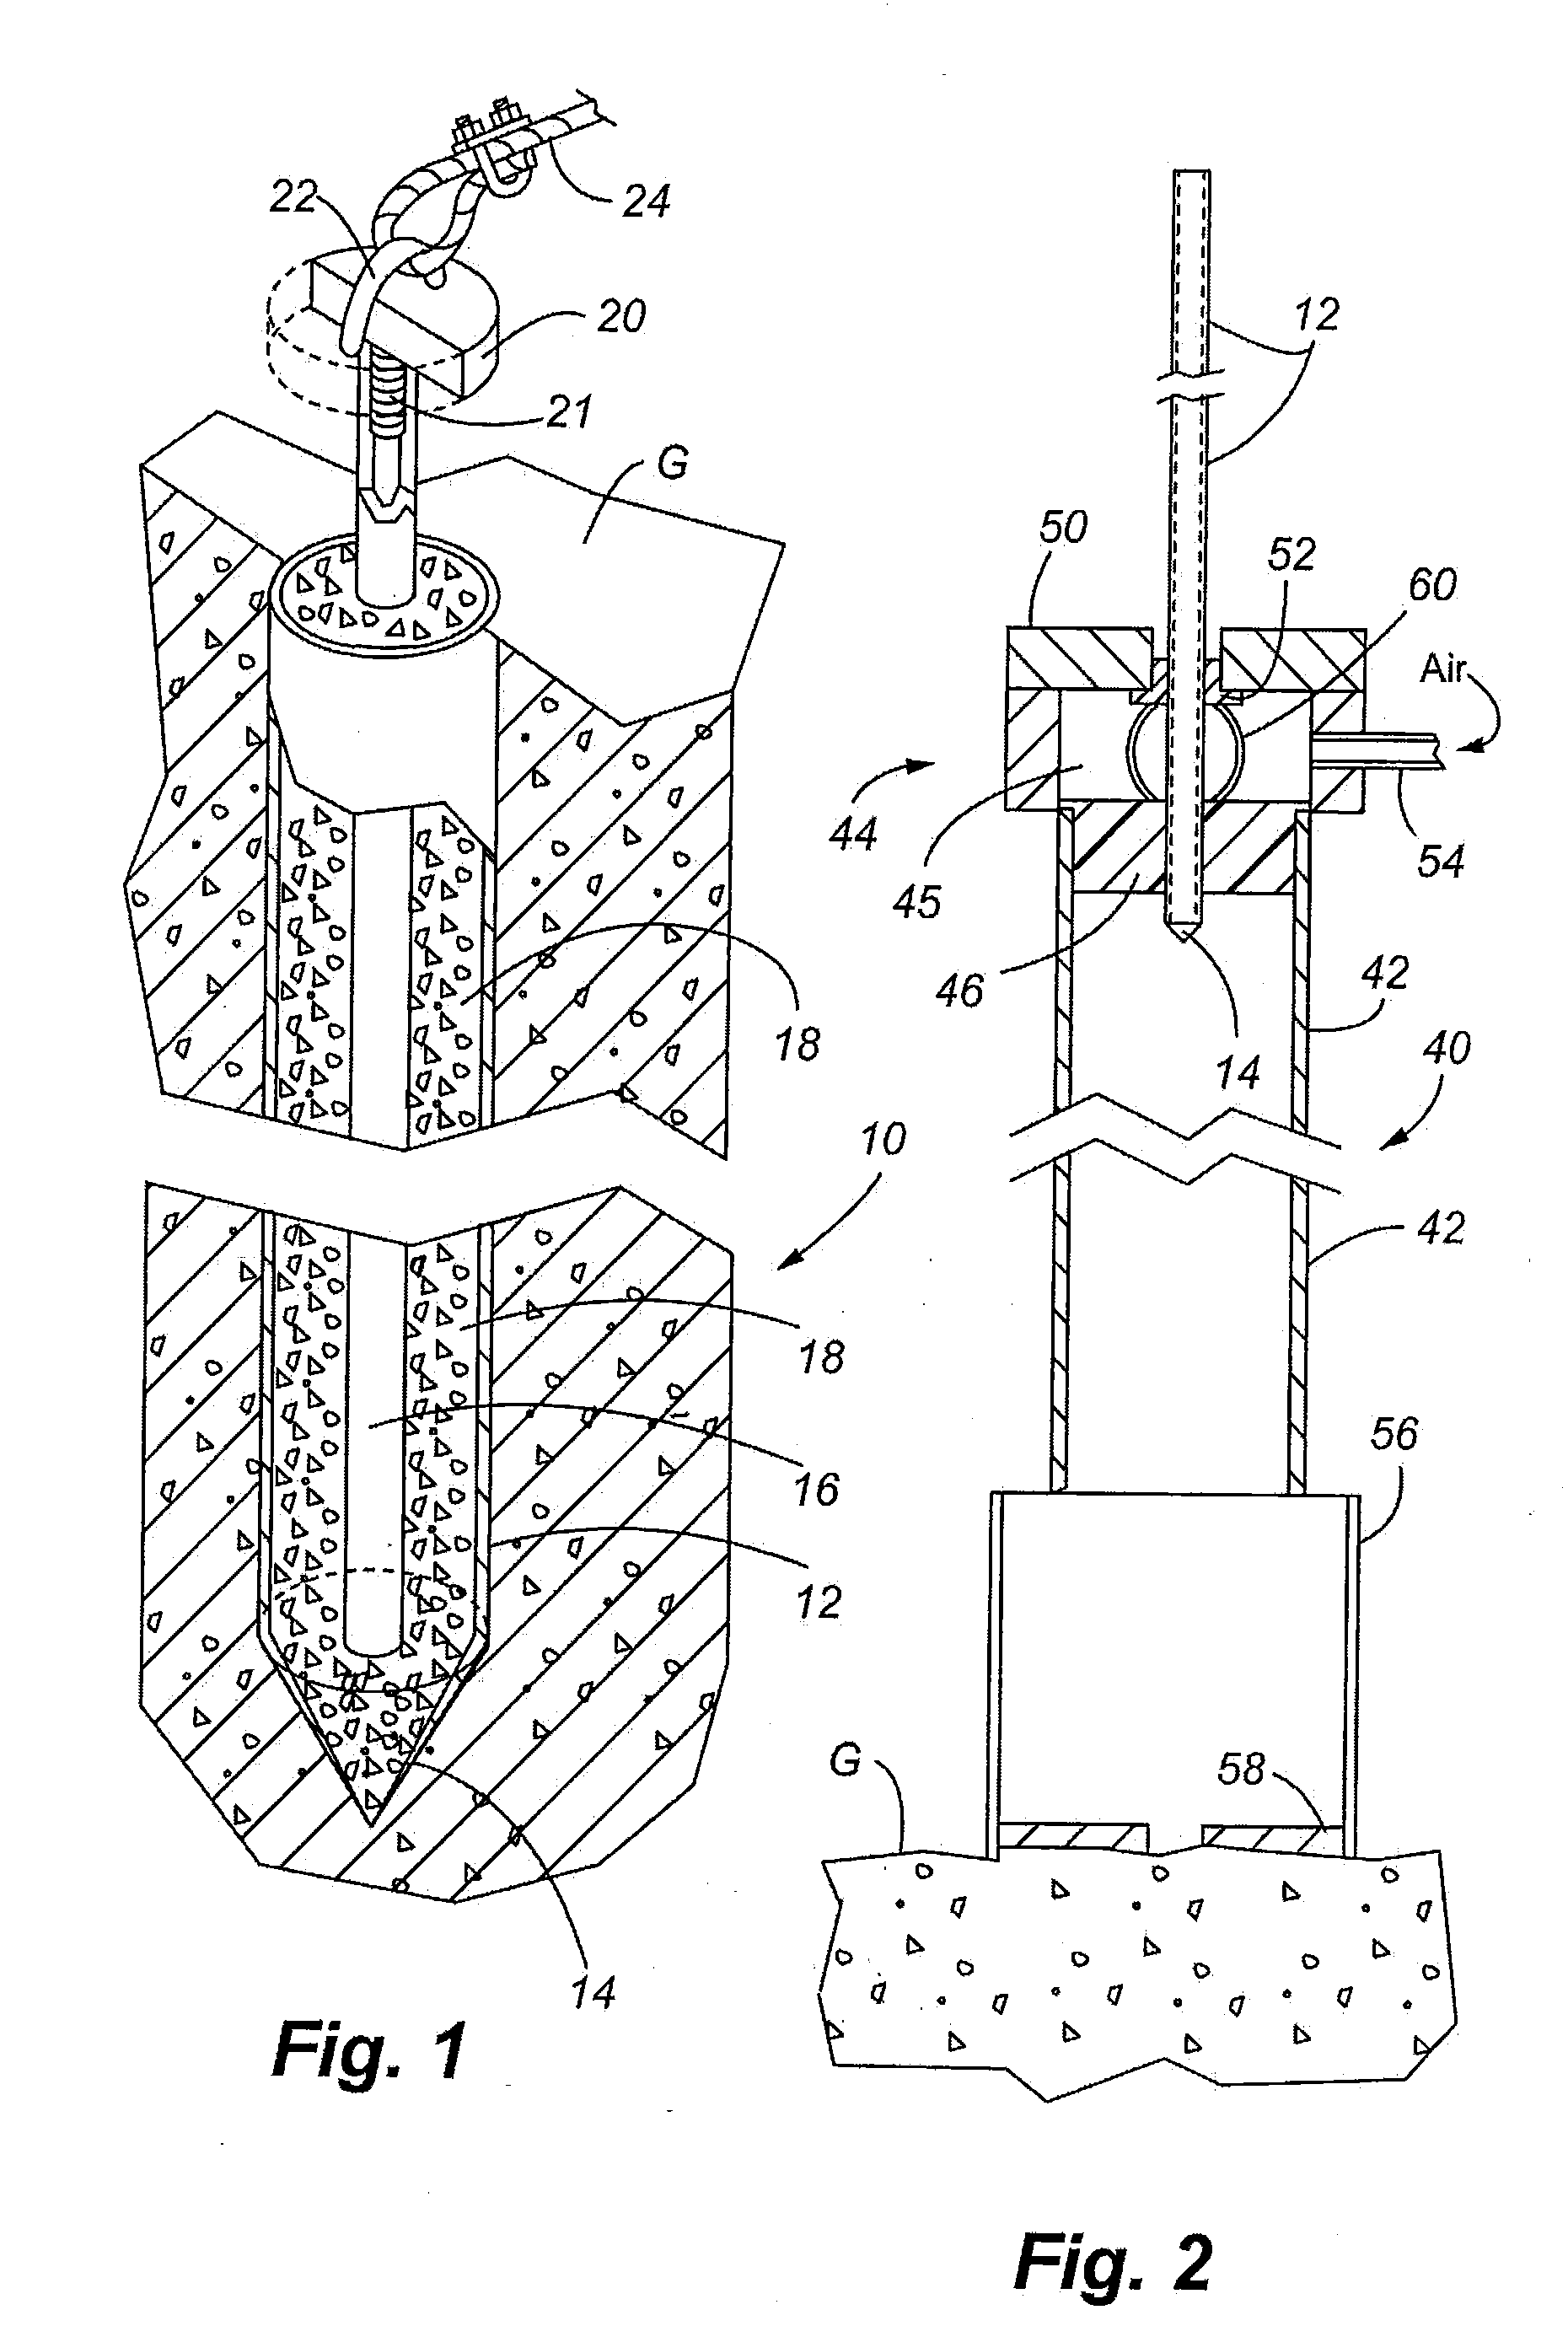 Self-centralizing soil nail and method of creating subsurface support